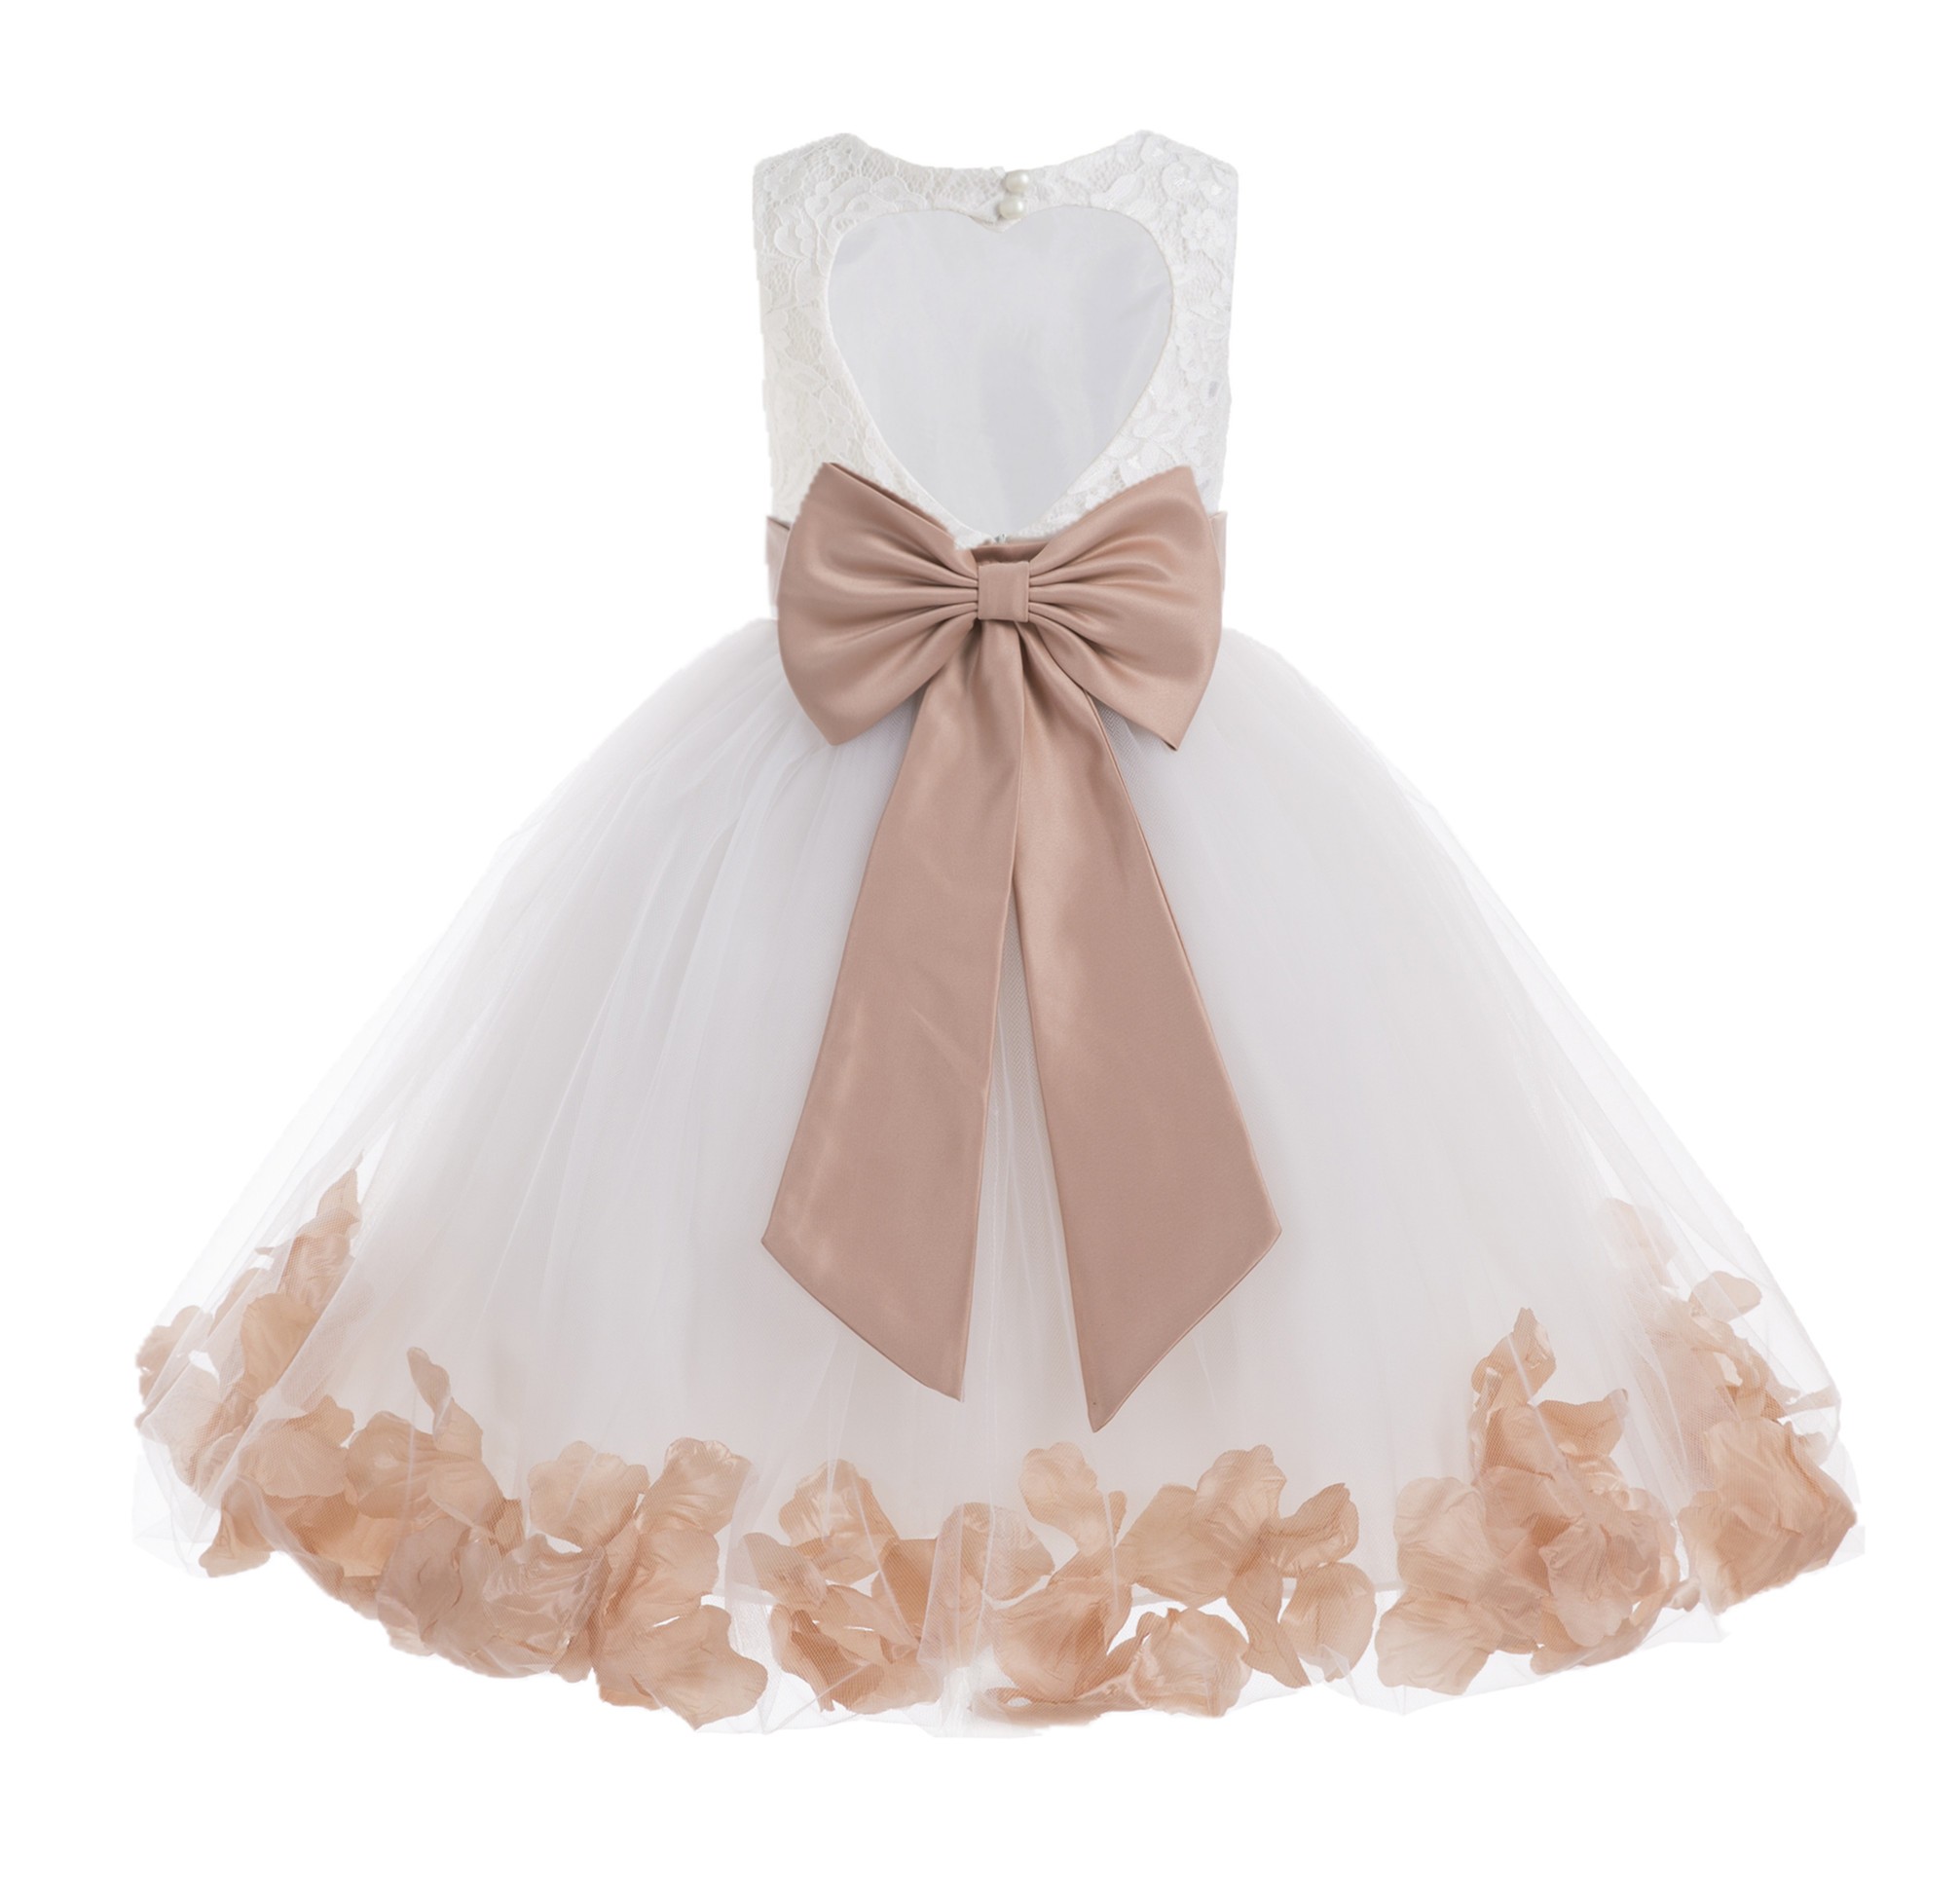 Ivory / Rose Gold Floral Lace Heart Cutout Flower Girl Dress with Petals 185T